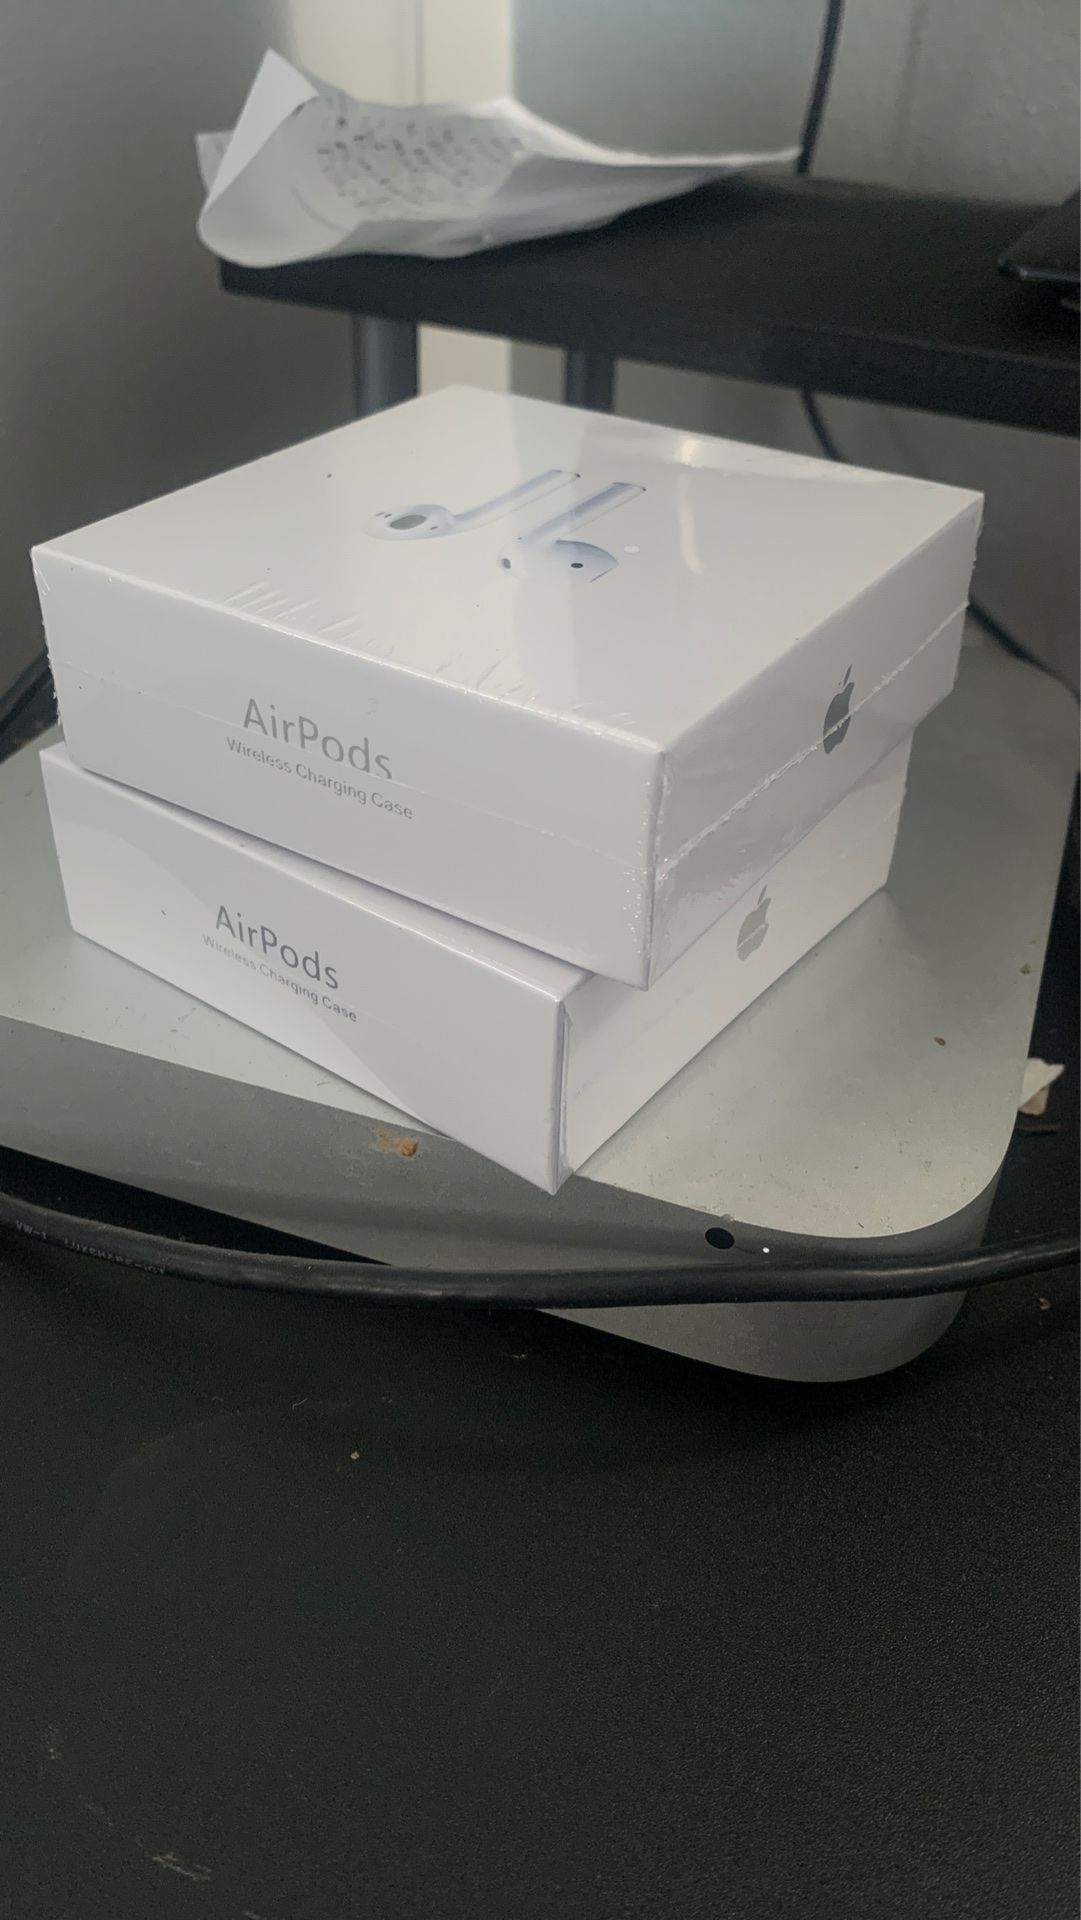 Offical Apple AirPods with wireless charging case